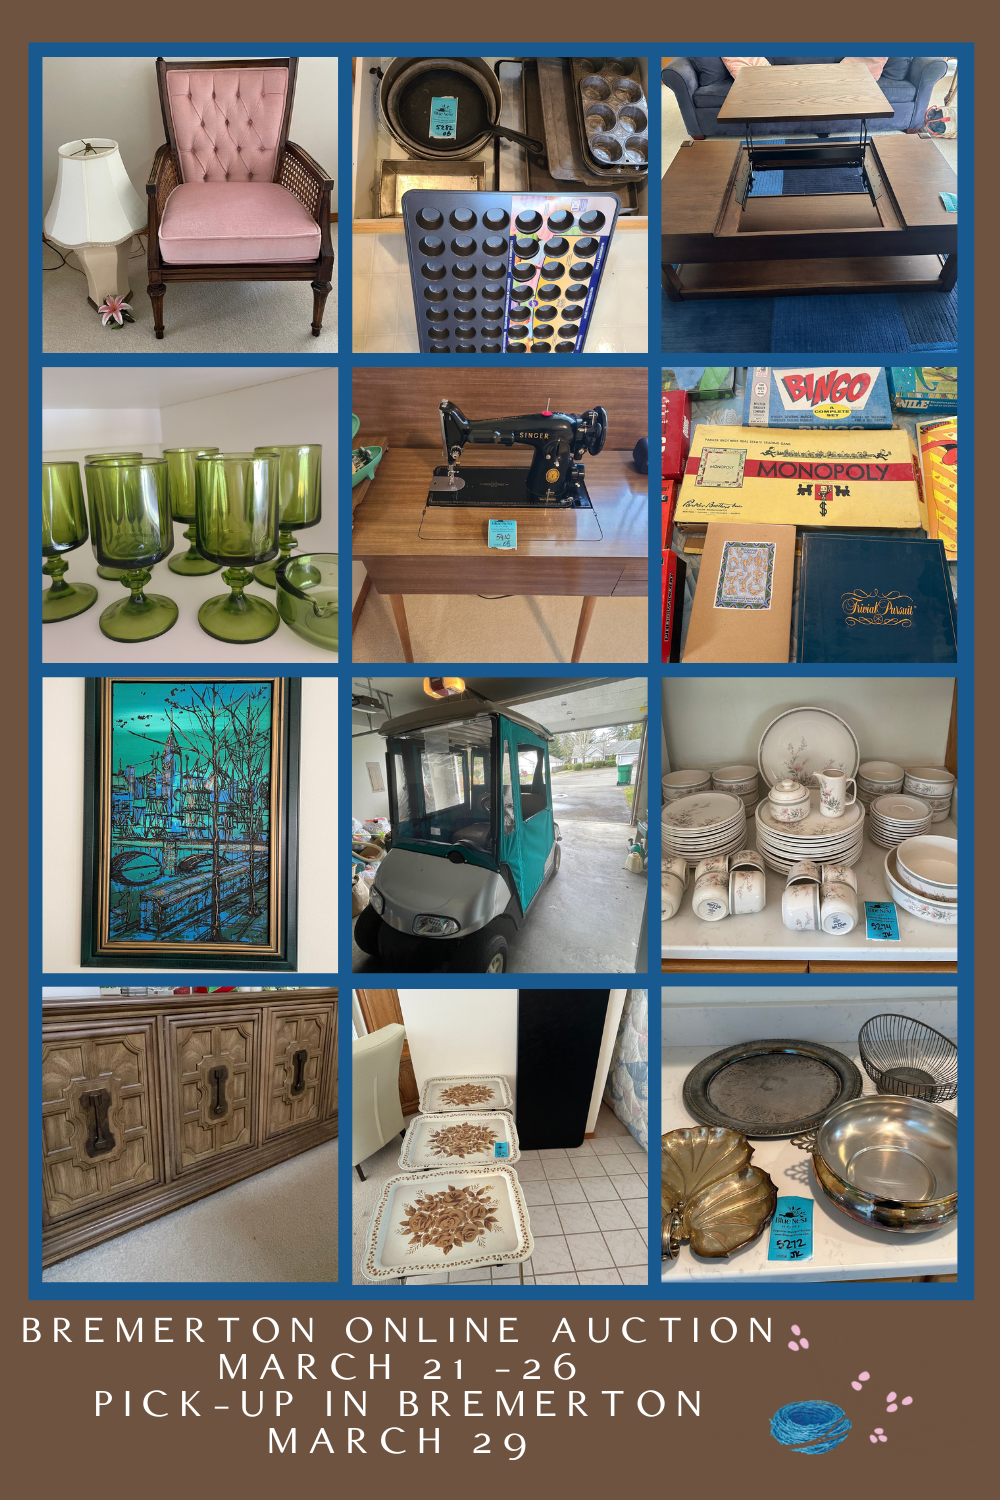 Bremerton Golf Cart Online Auction featuring an EZ-GO golf cart, a vintage Singer sewing machine, vintage board games, furniture and more.